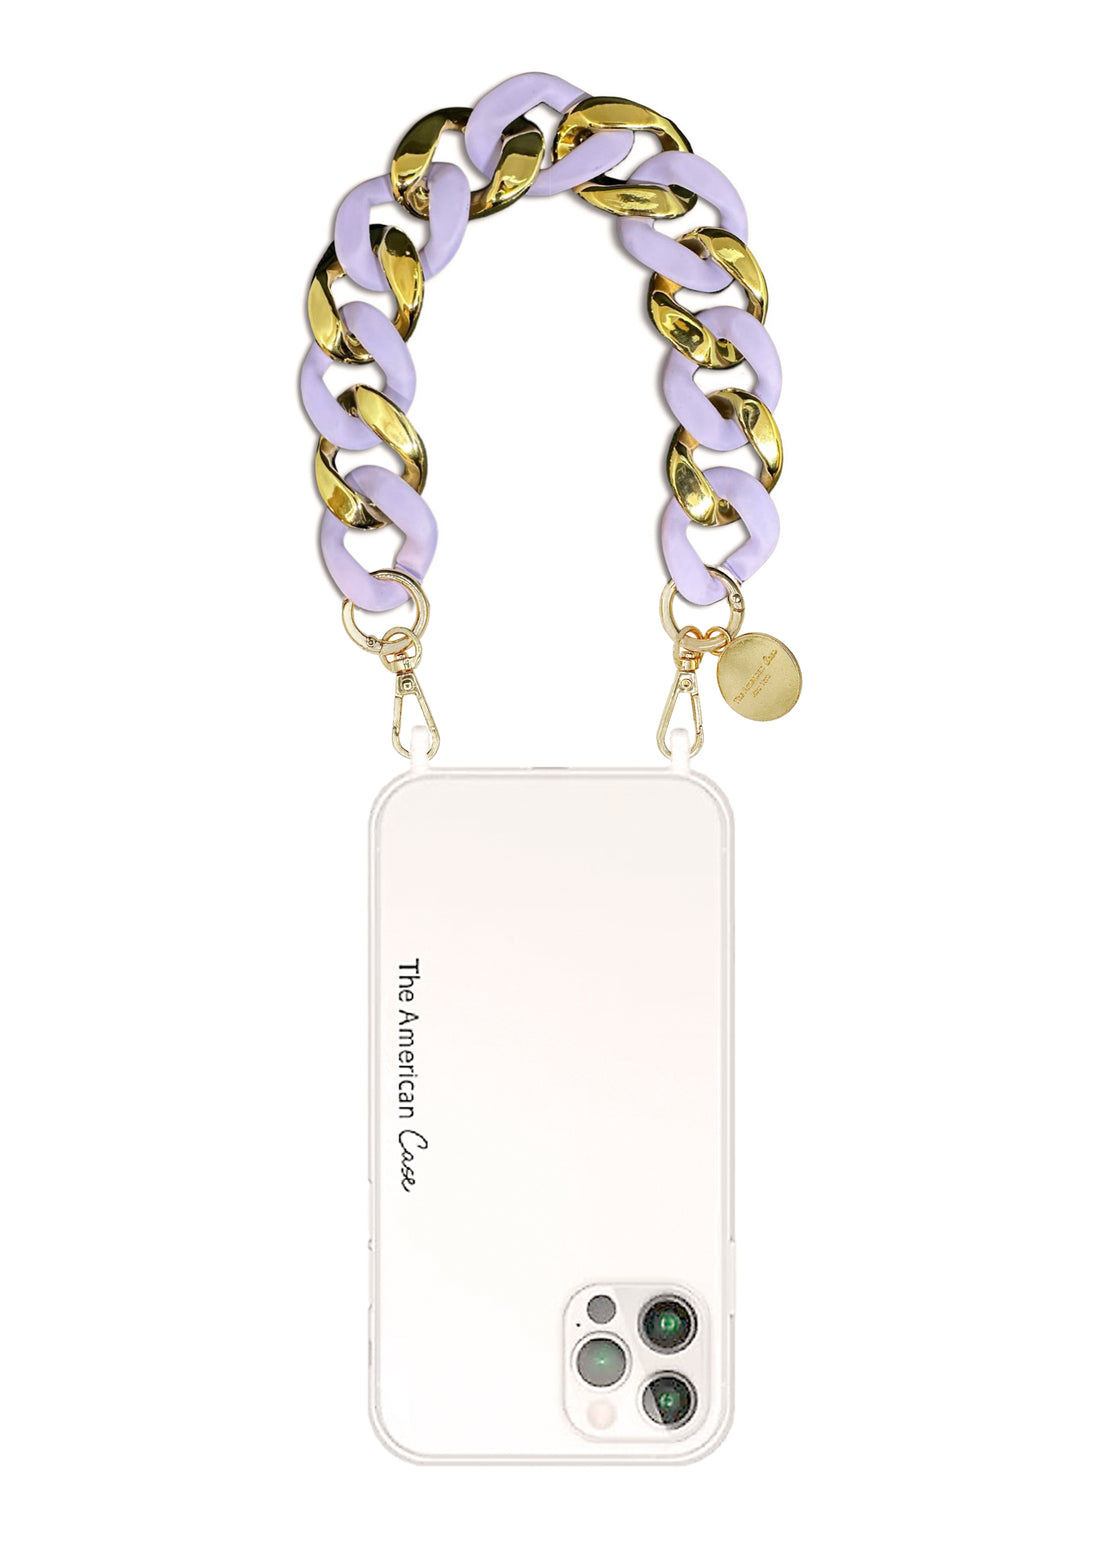 Jalila - Gold Tone Links Bracelet Phone Chain with Golden Carabiners